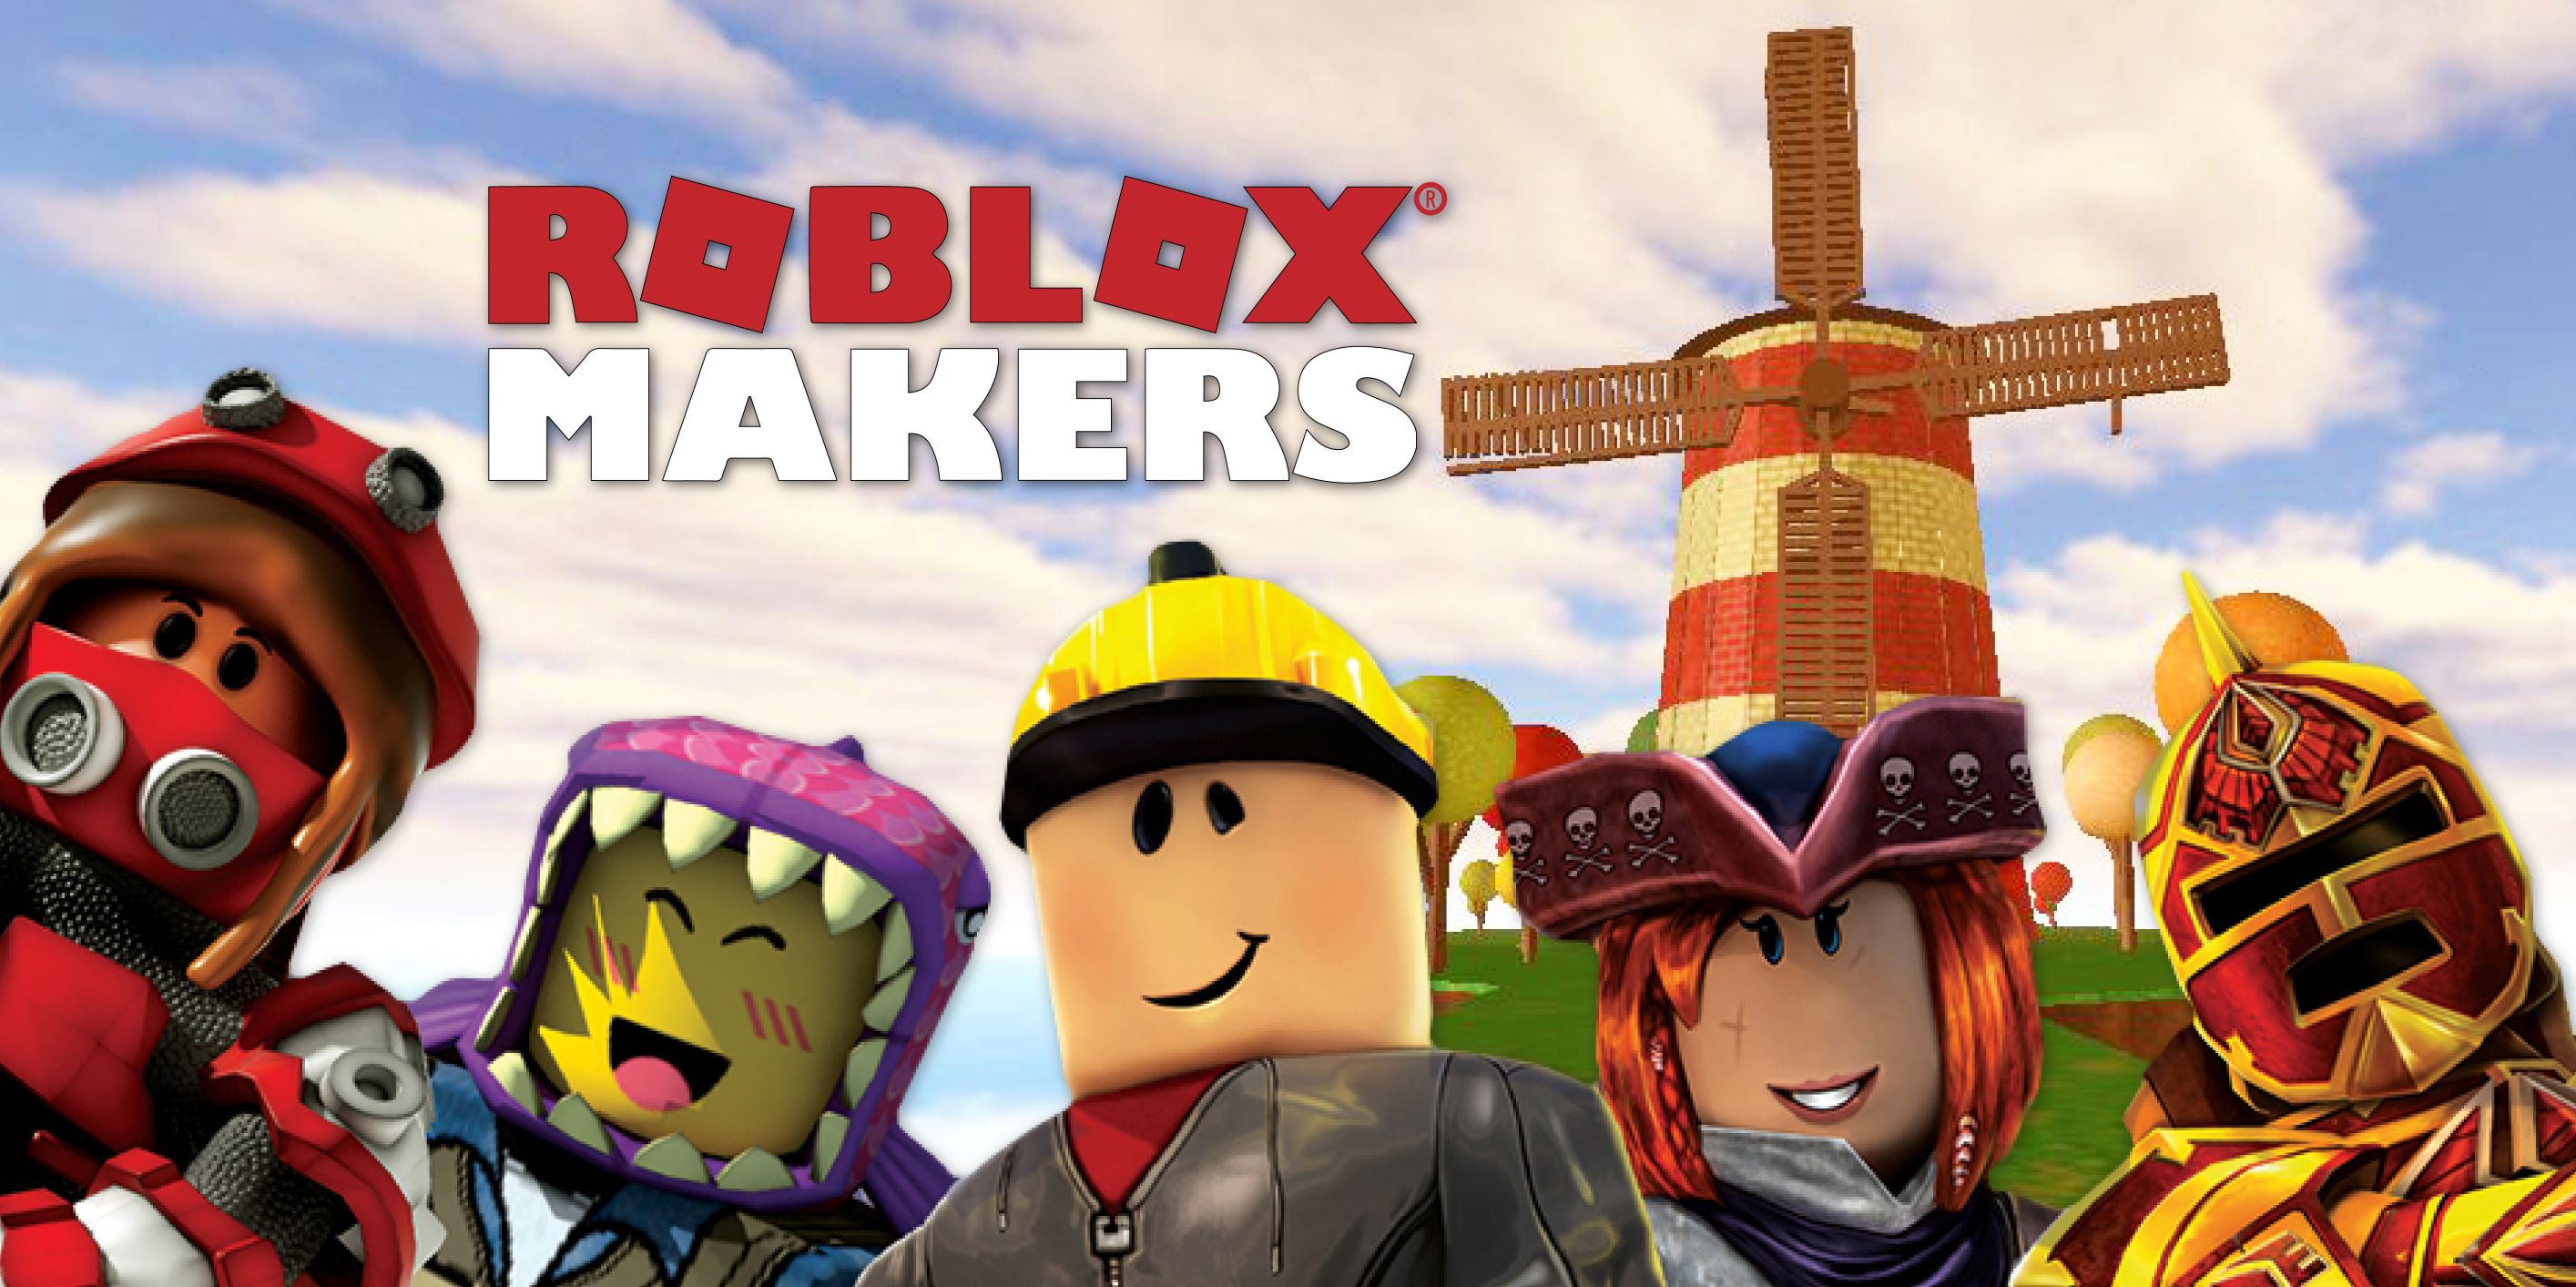 Suny Jefferson Calendar Kids College Roblox Makers Virtual Workshop - pictures of roblox characters with grid